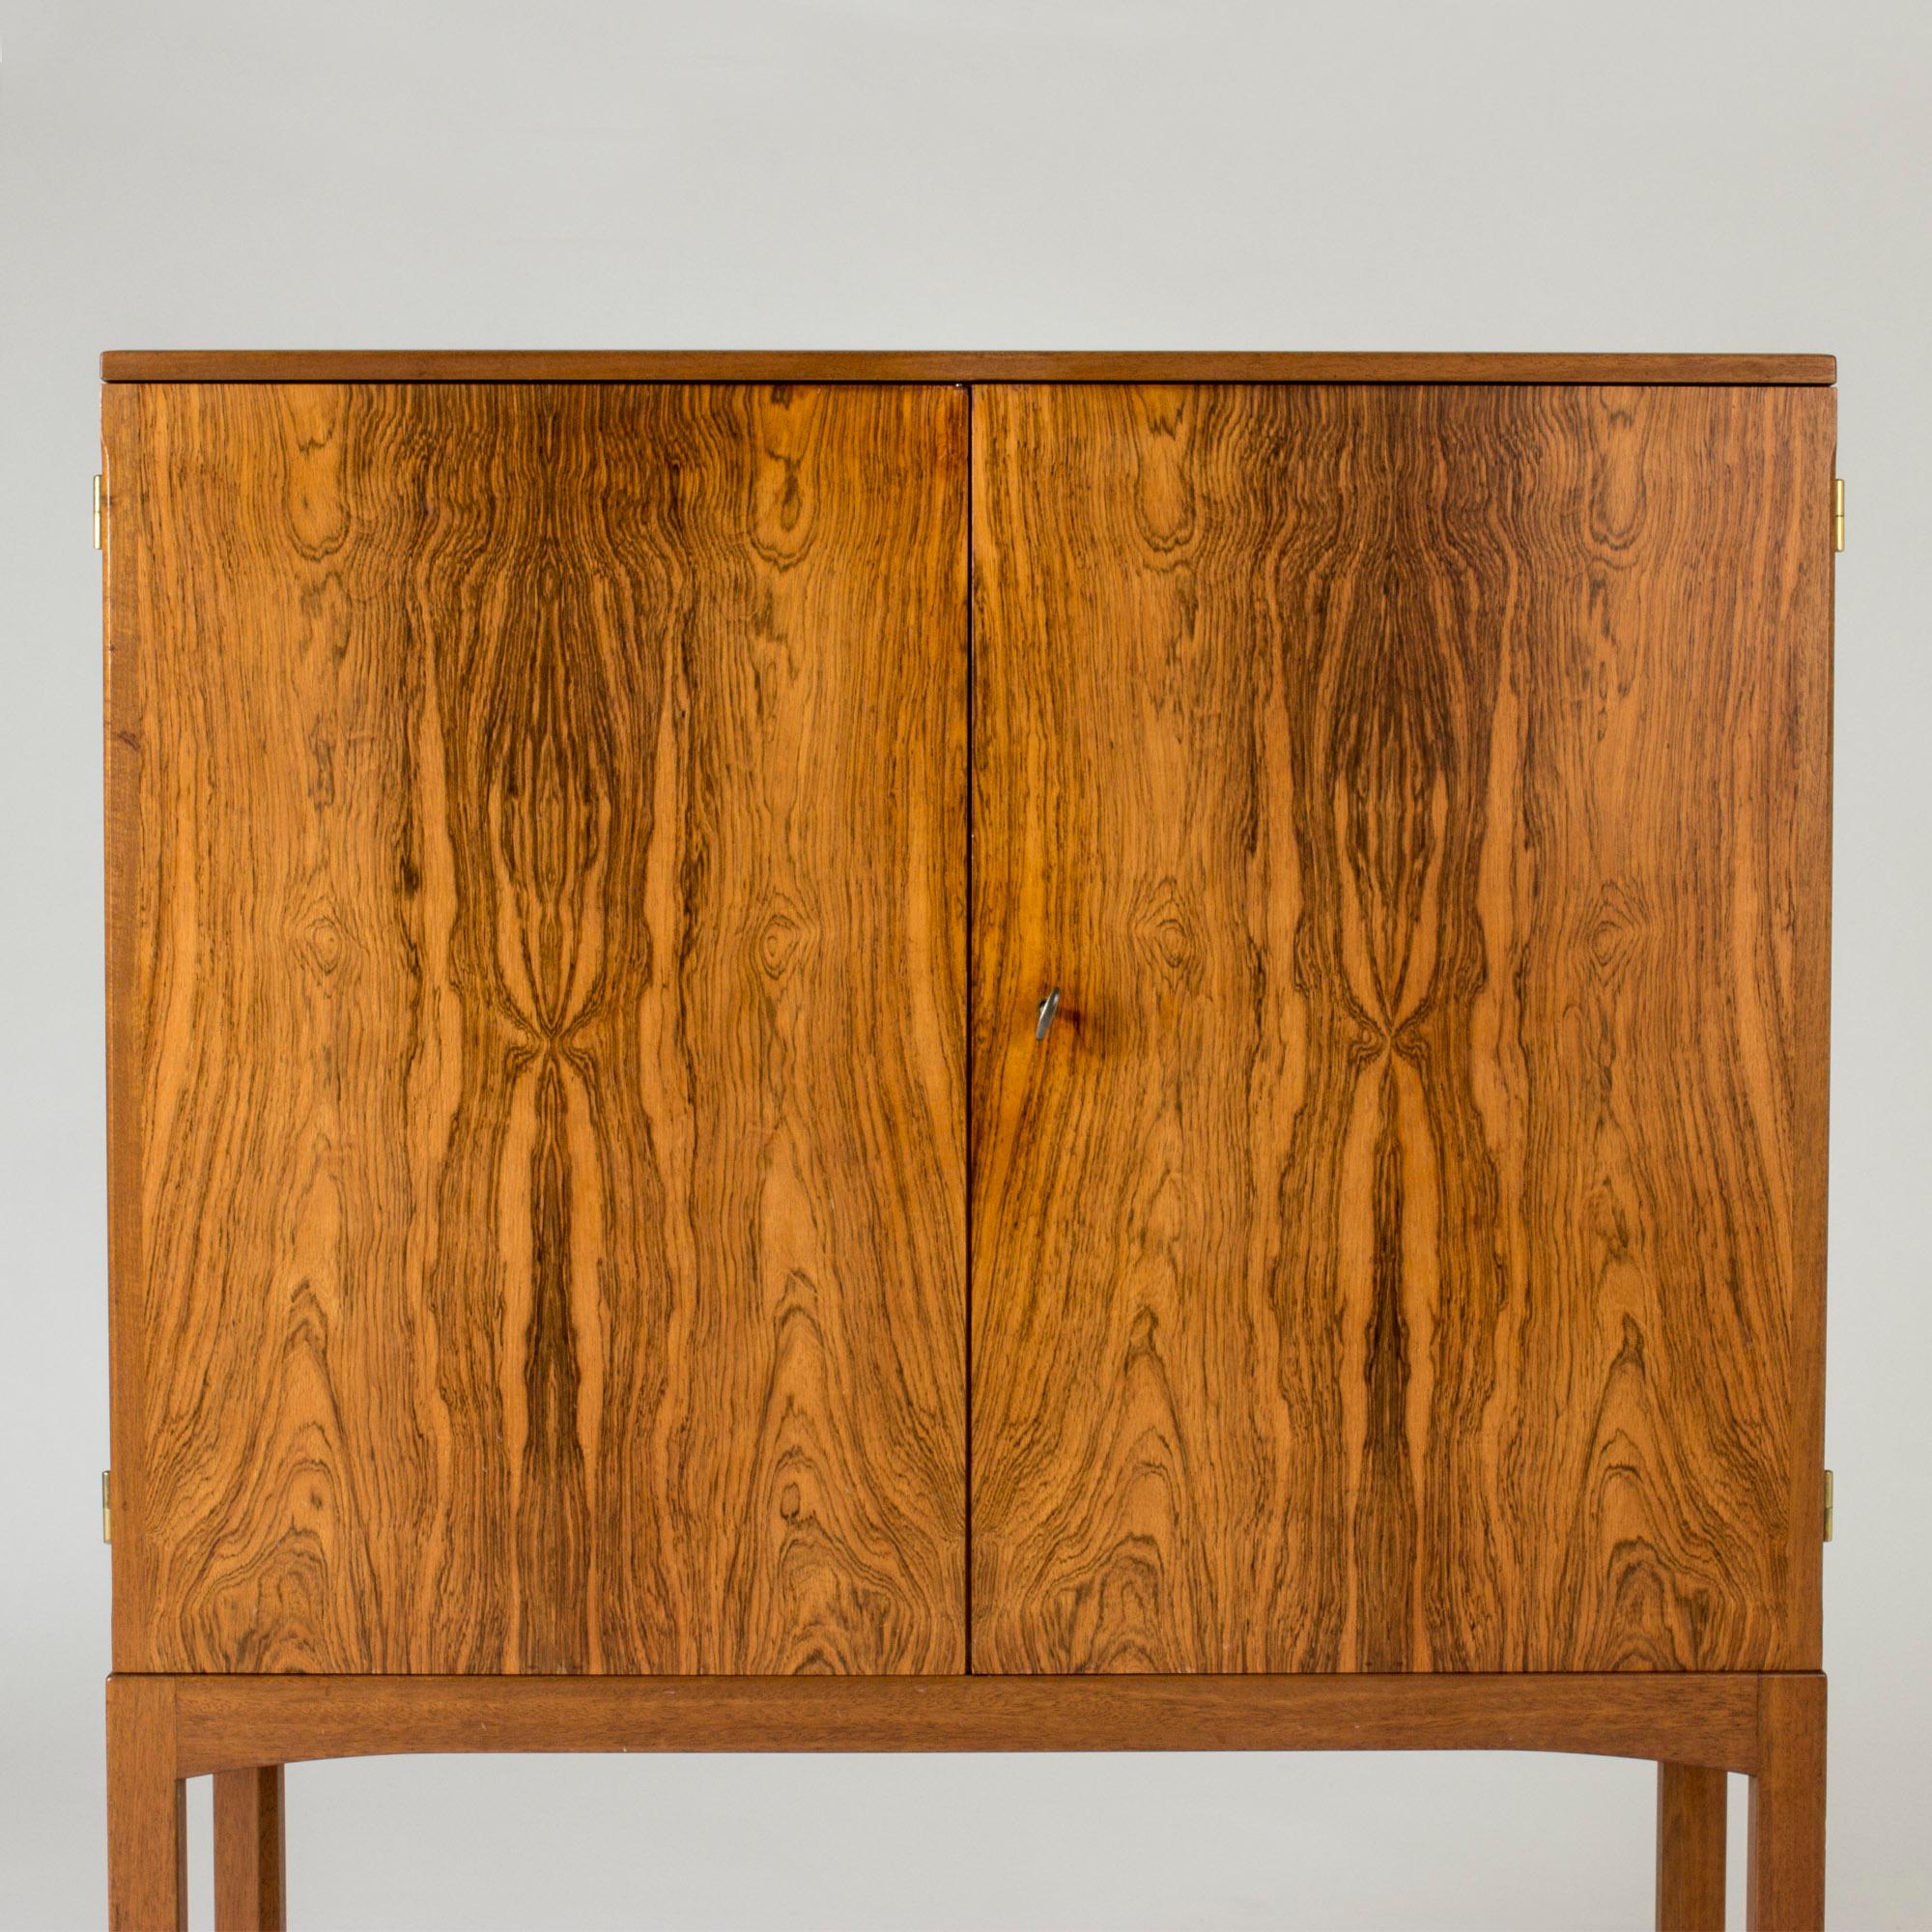 Elegant Swedish modernist cabinet, made from rosewood. Clean lines, neat size, with beautiful woodgrain.